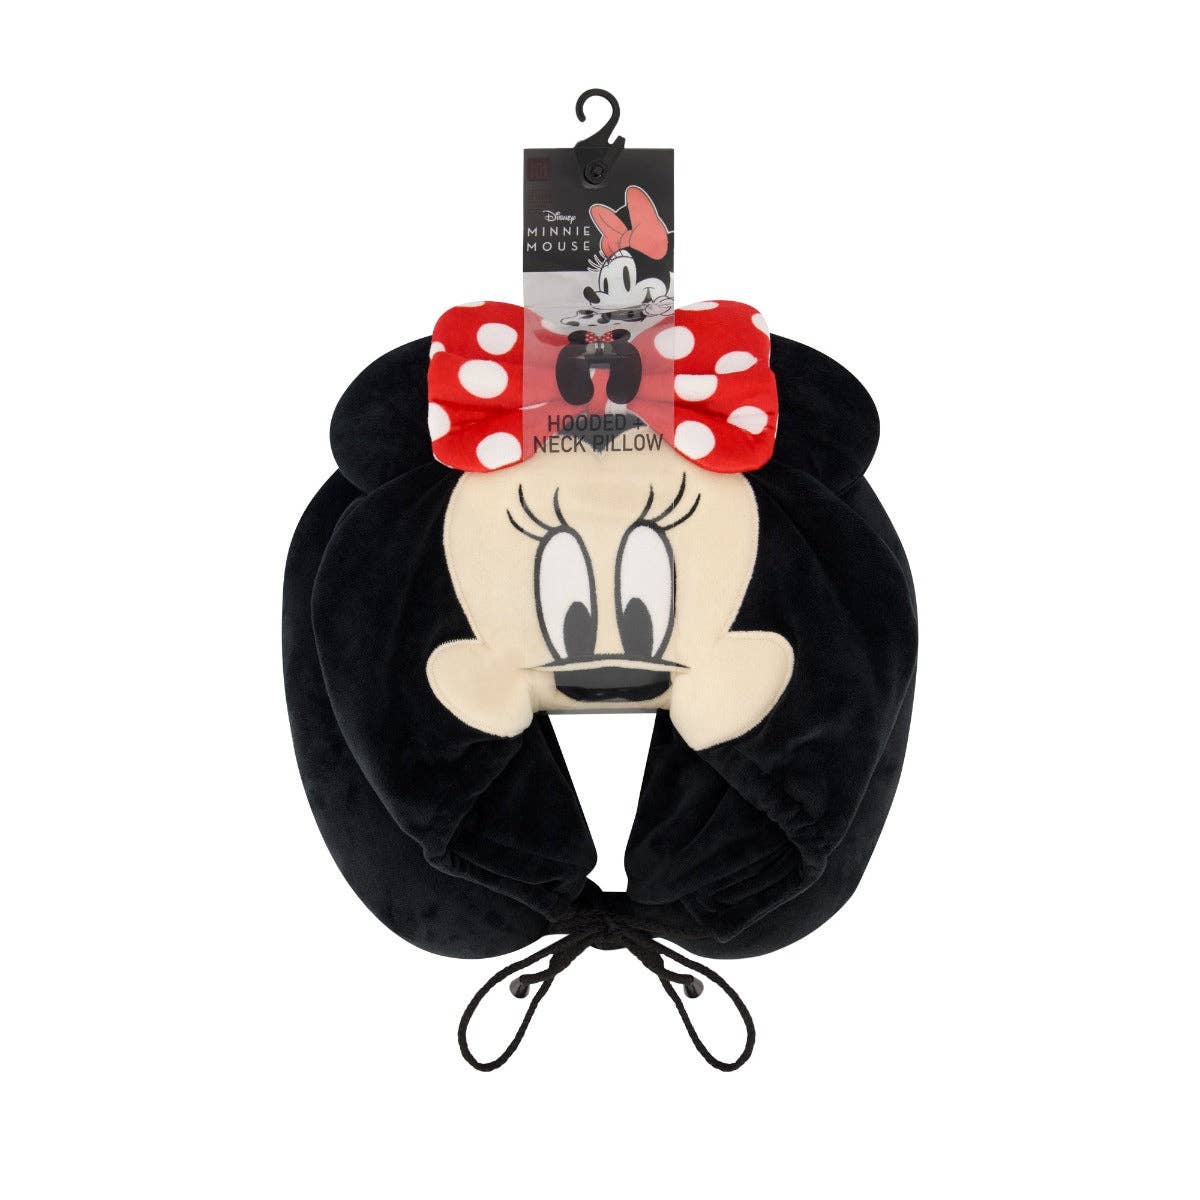 Minnie Mouse Travel Neck Pillow Hoodie, Black